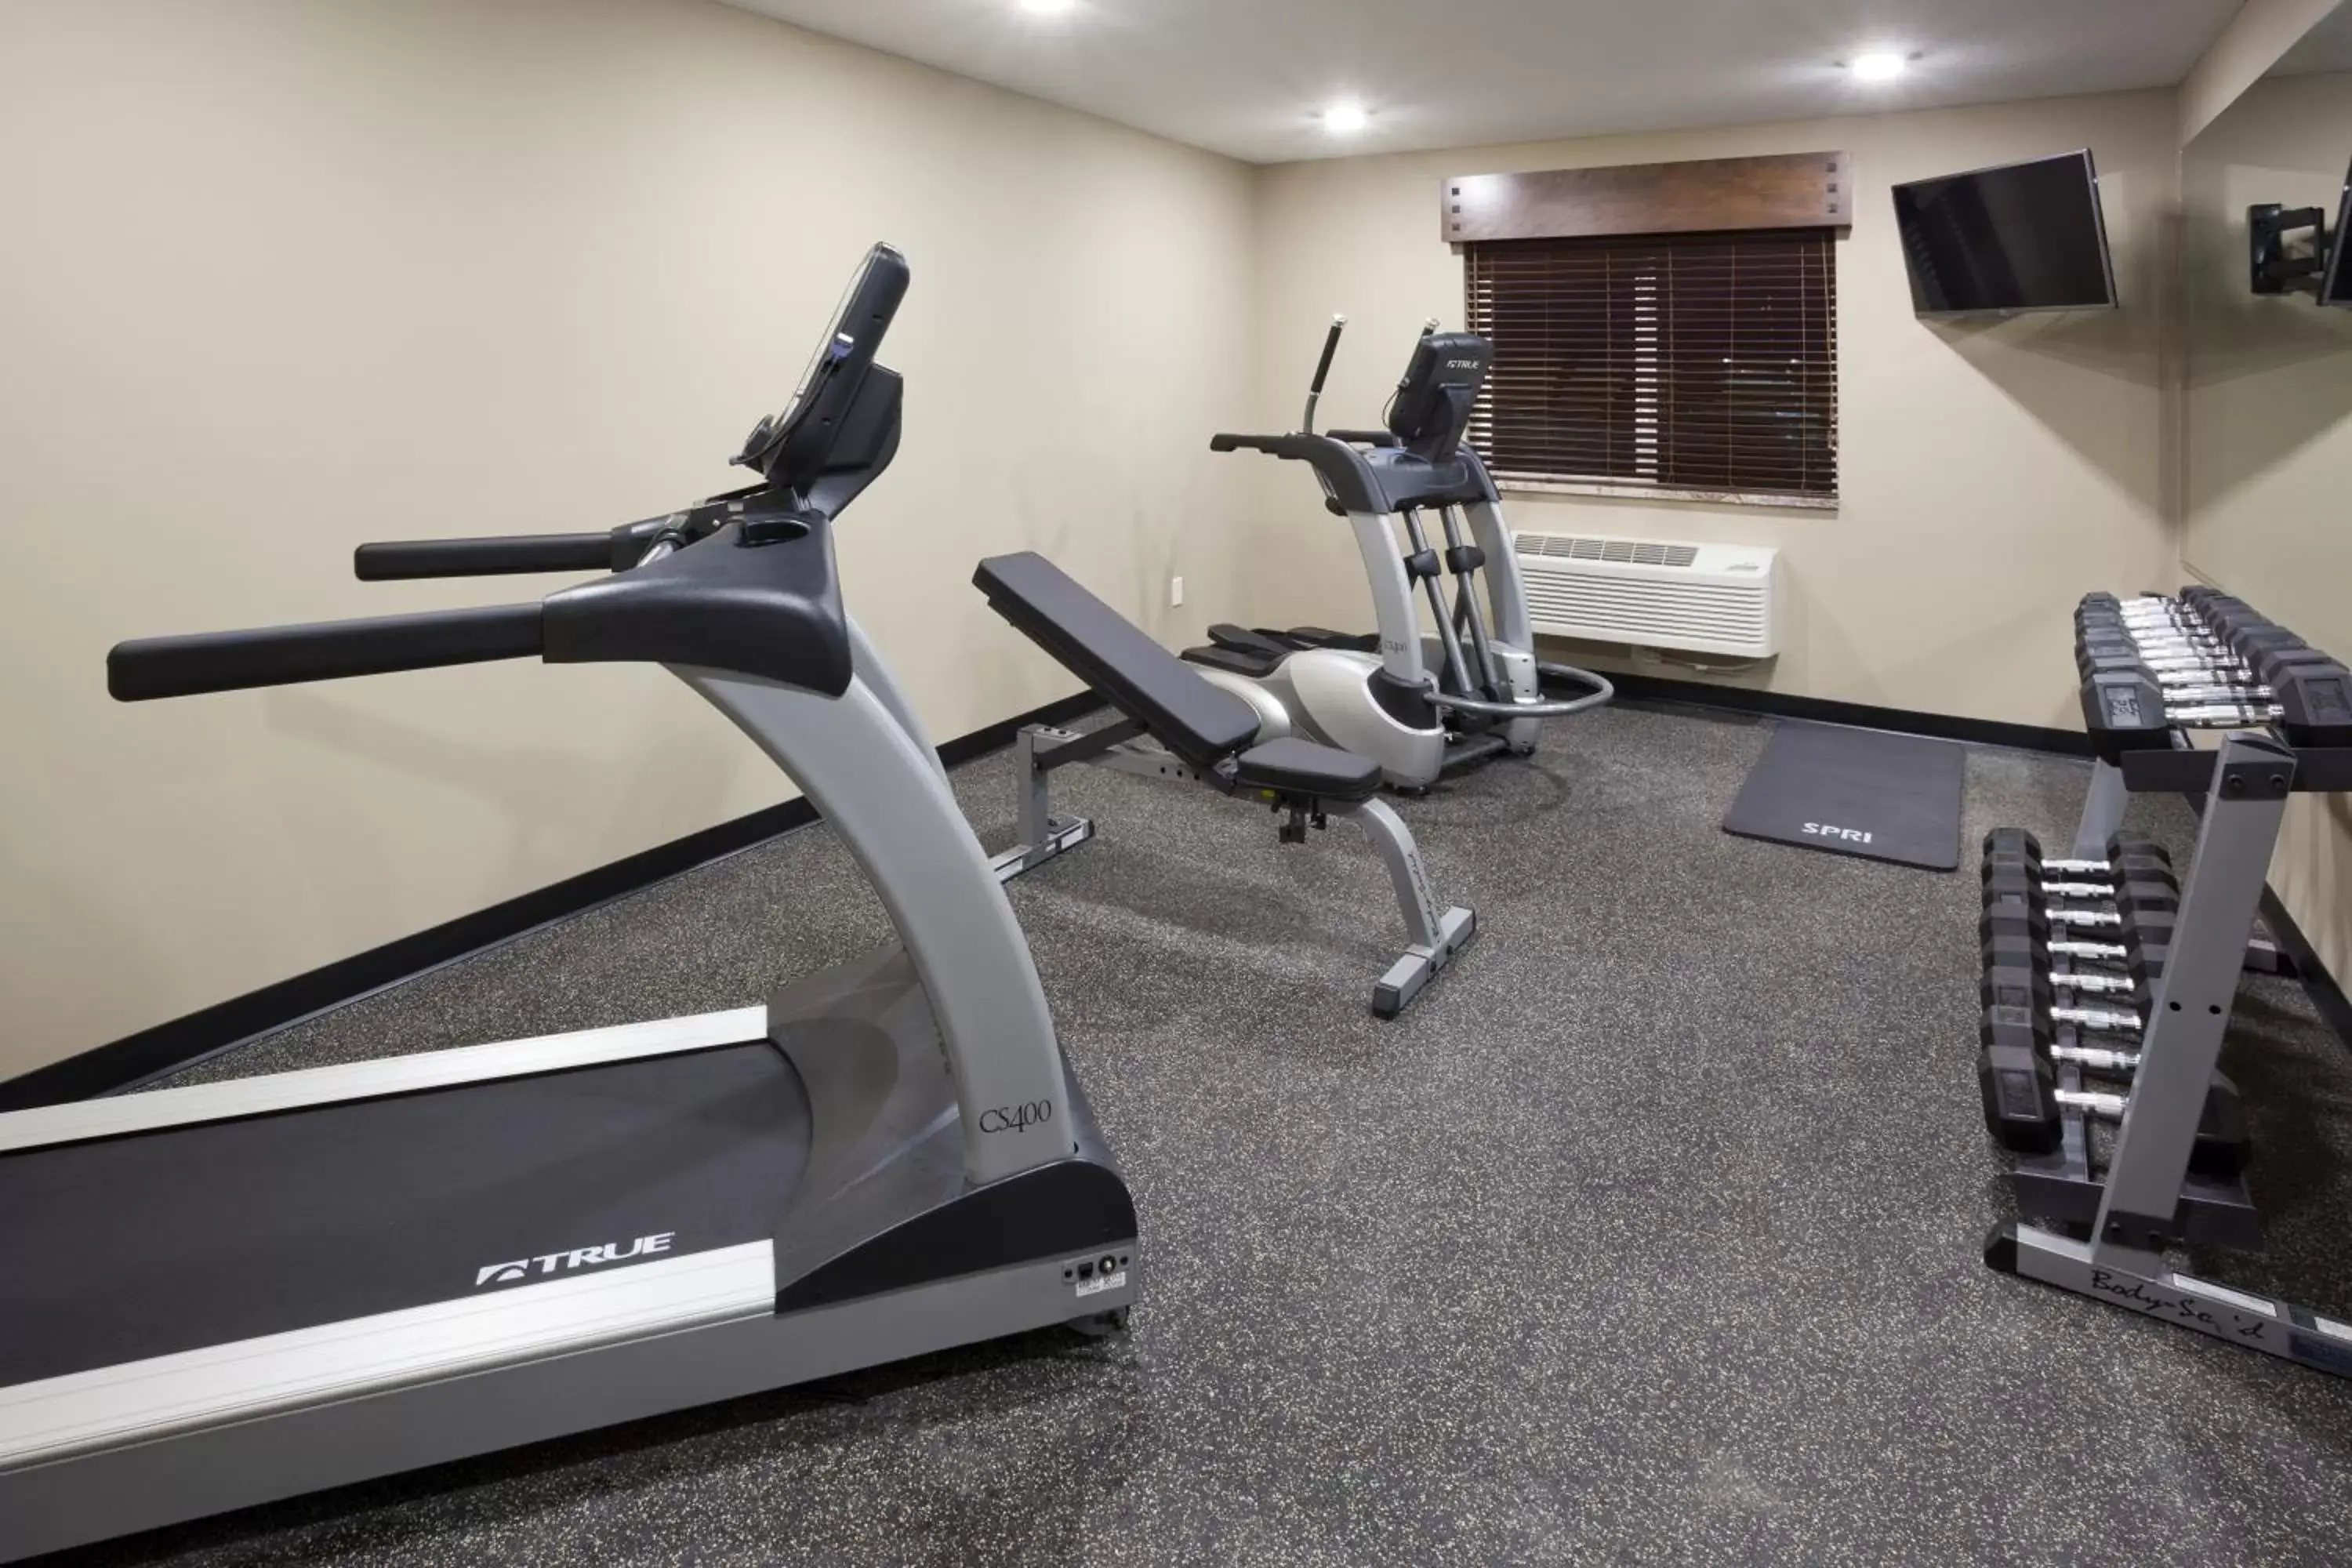 Fitness centre/facilities, Fitness Center/Facilities in GrandStay Hotel and Suites - Tea/Sioux Falls